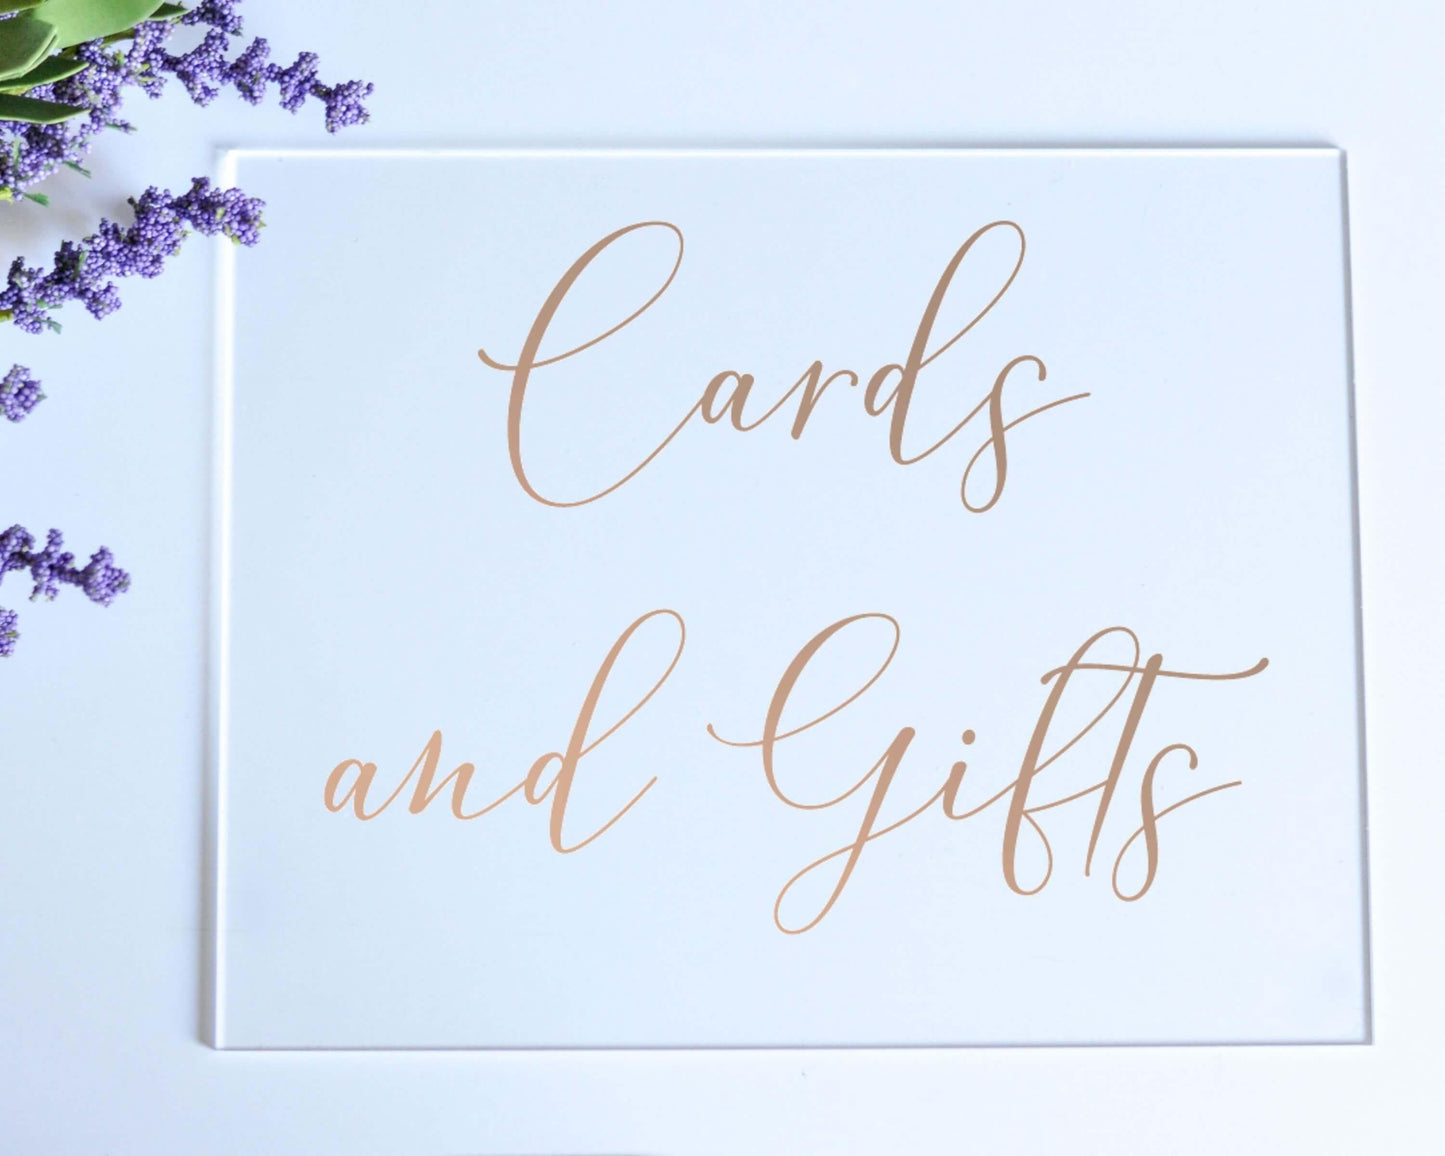 Cards and Gifts Acrylic Sign with Clear Background | 8 X 10" - Crystal Rose Design Co.